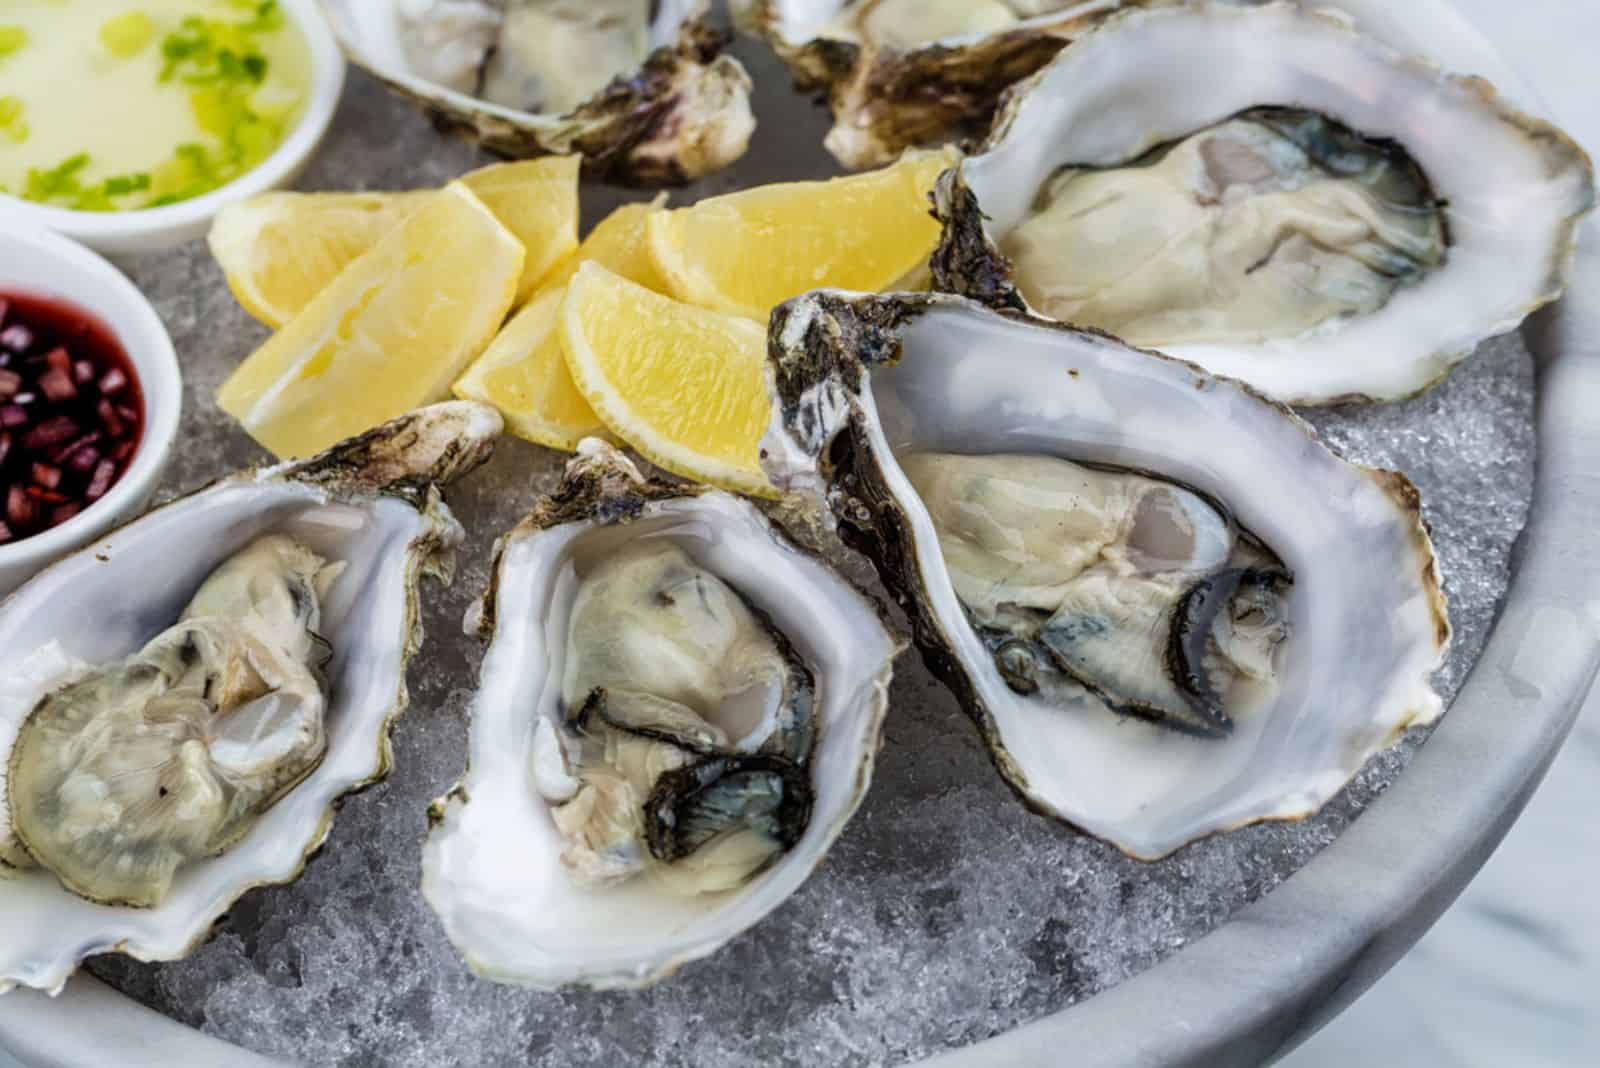 Fresh oysters platter with sauce and lemon